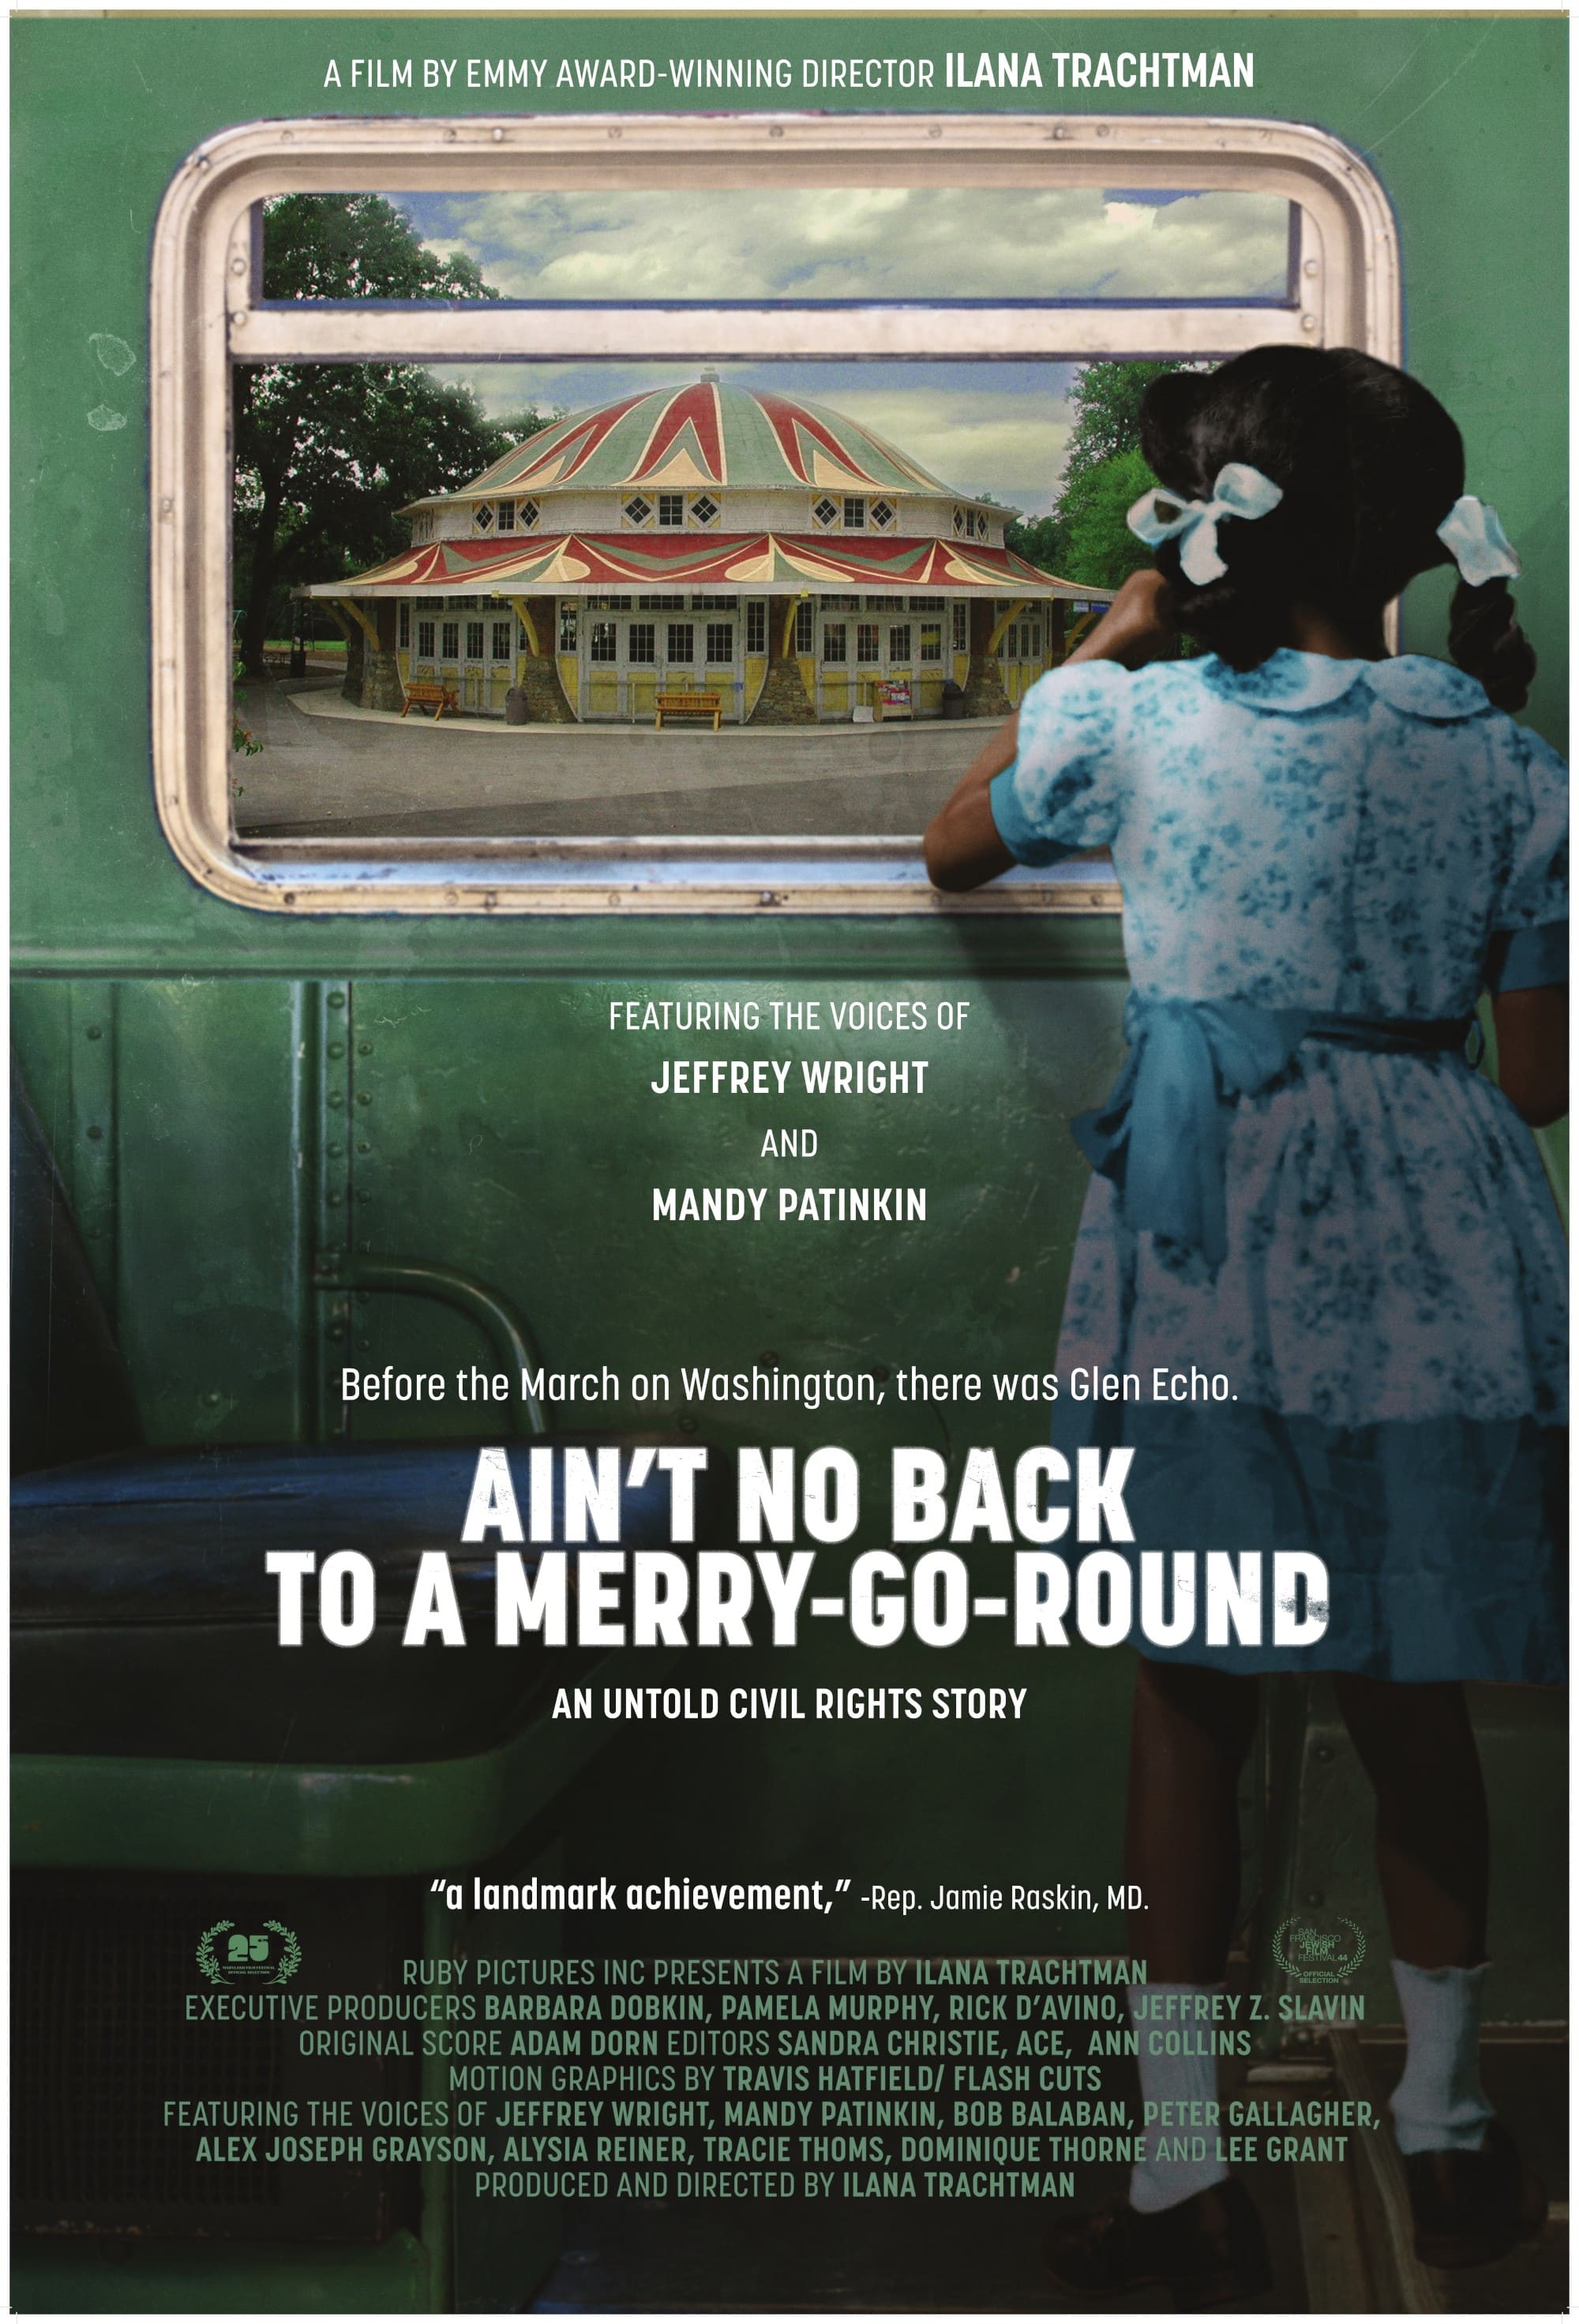 Ain’t No Back to a Merry-Go-Round